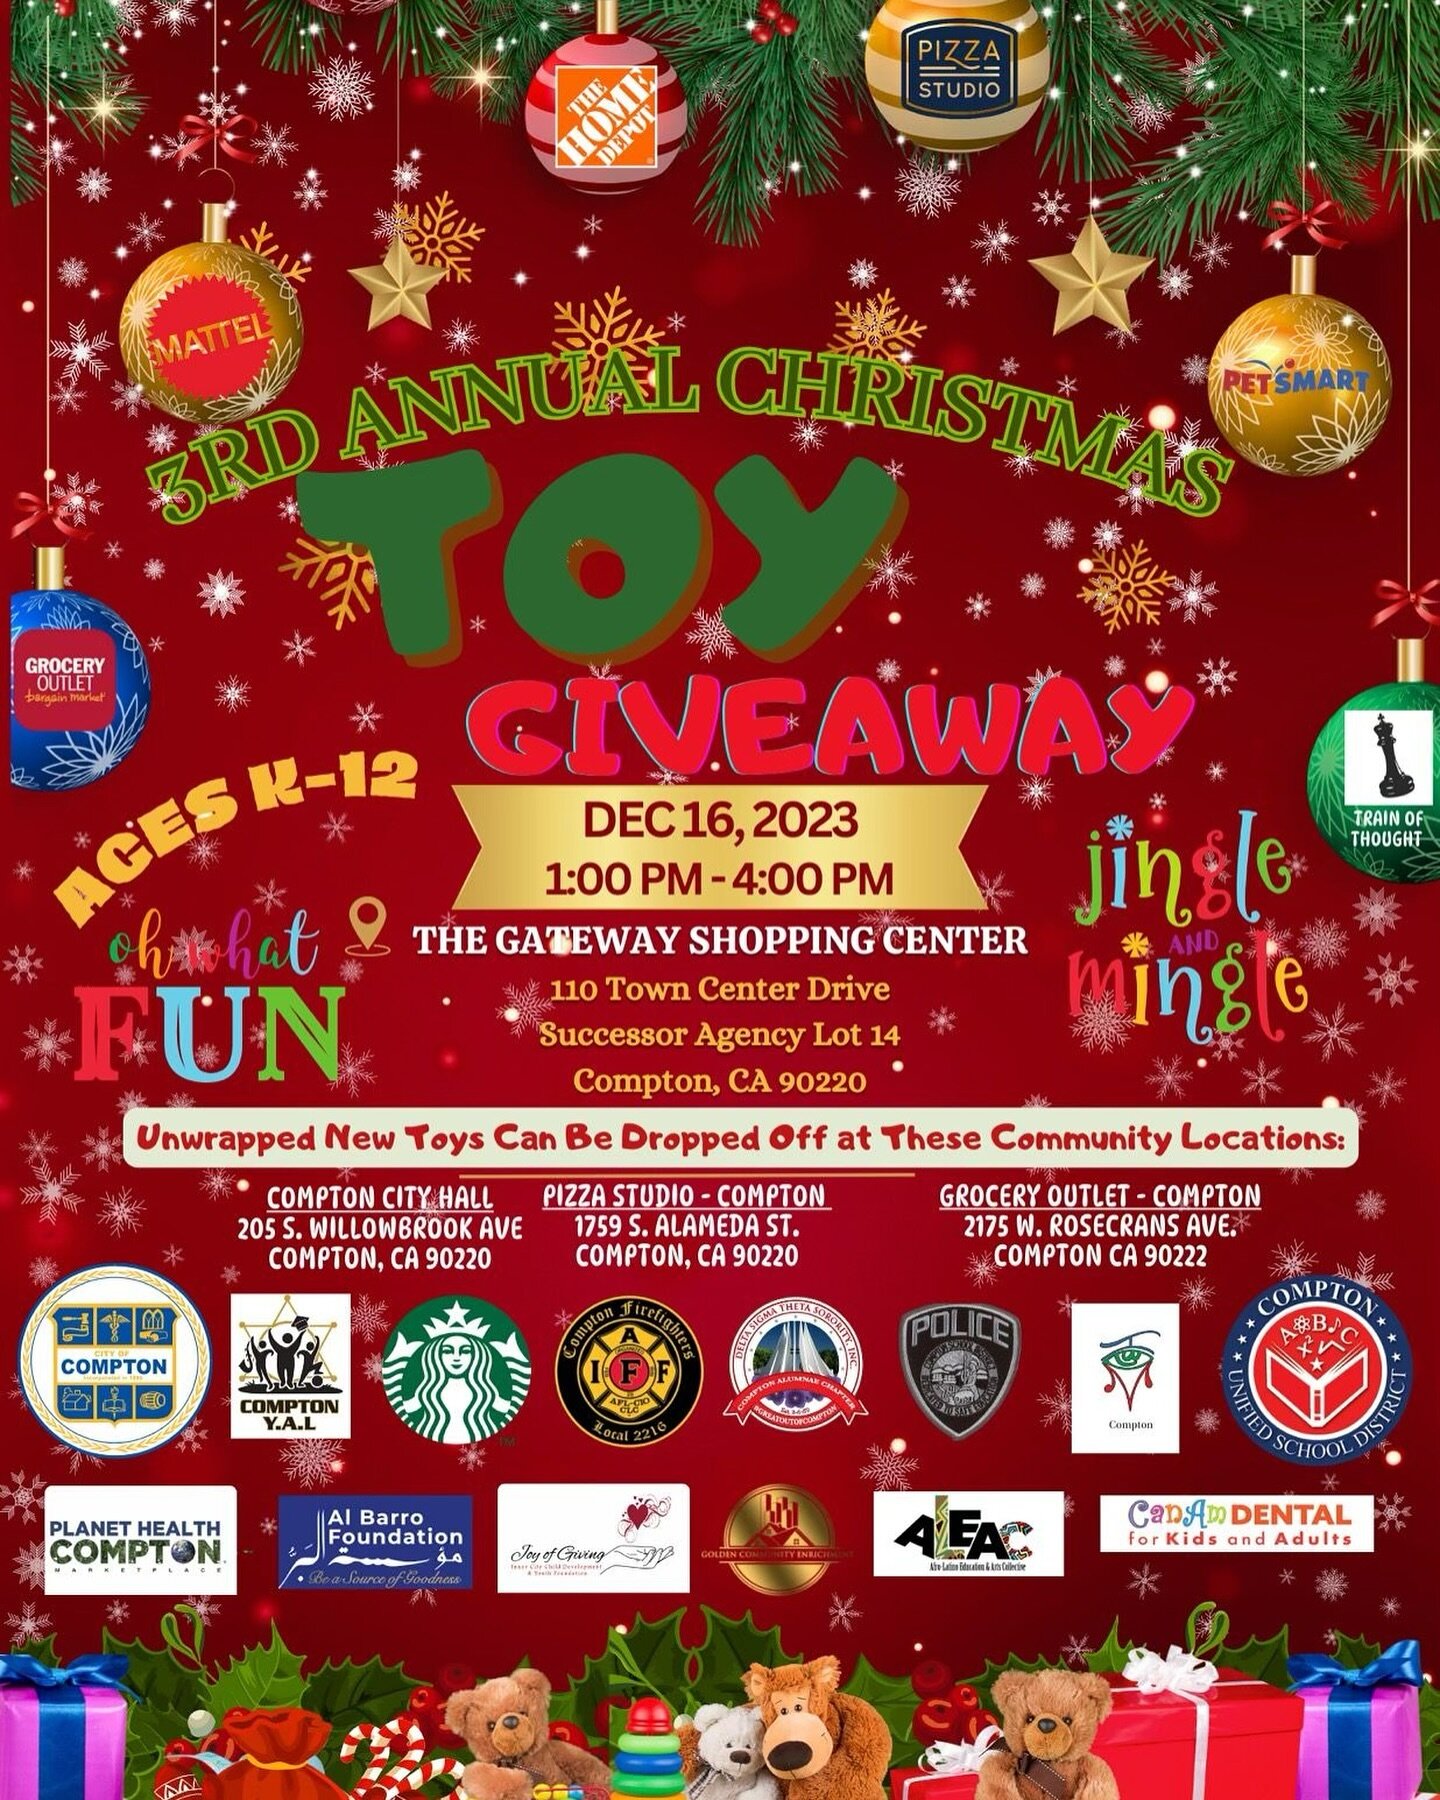 [ Toy Drive ]: We&rsquo;re excited to partner w/ so many heavy hitters in the city, even more excited about serving the community and most importantly the KIDS

Bring the little humans out to receive a FREE toy, see live entertainment, paint stocking